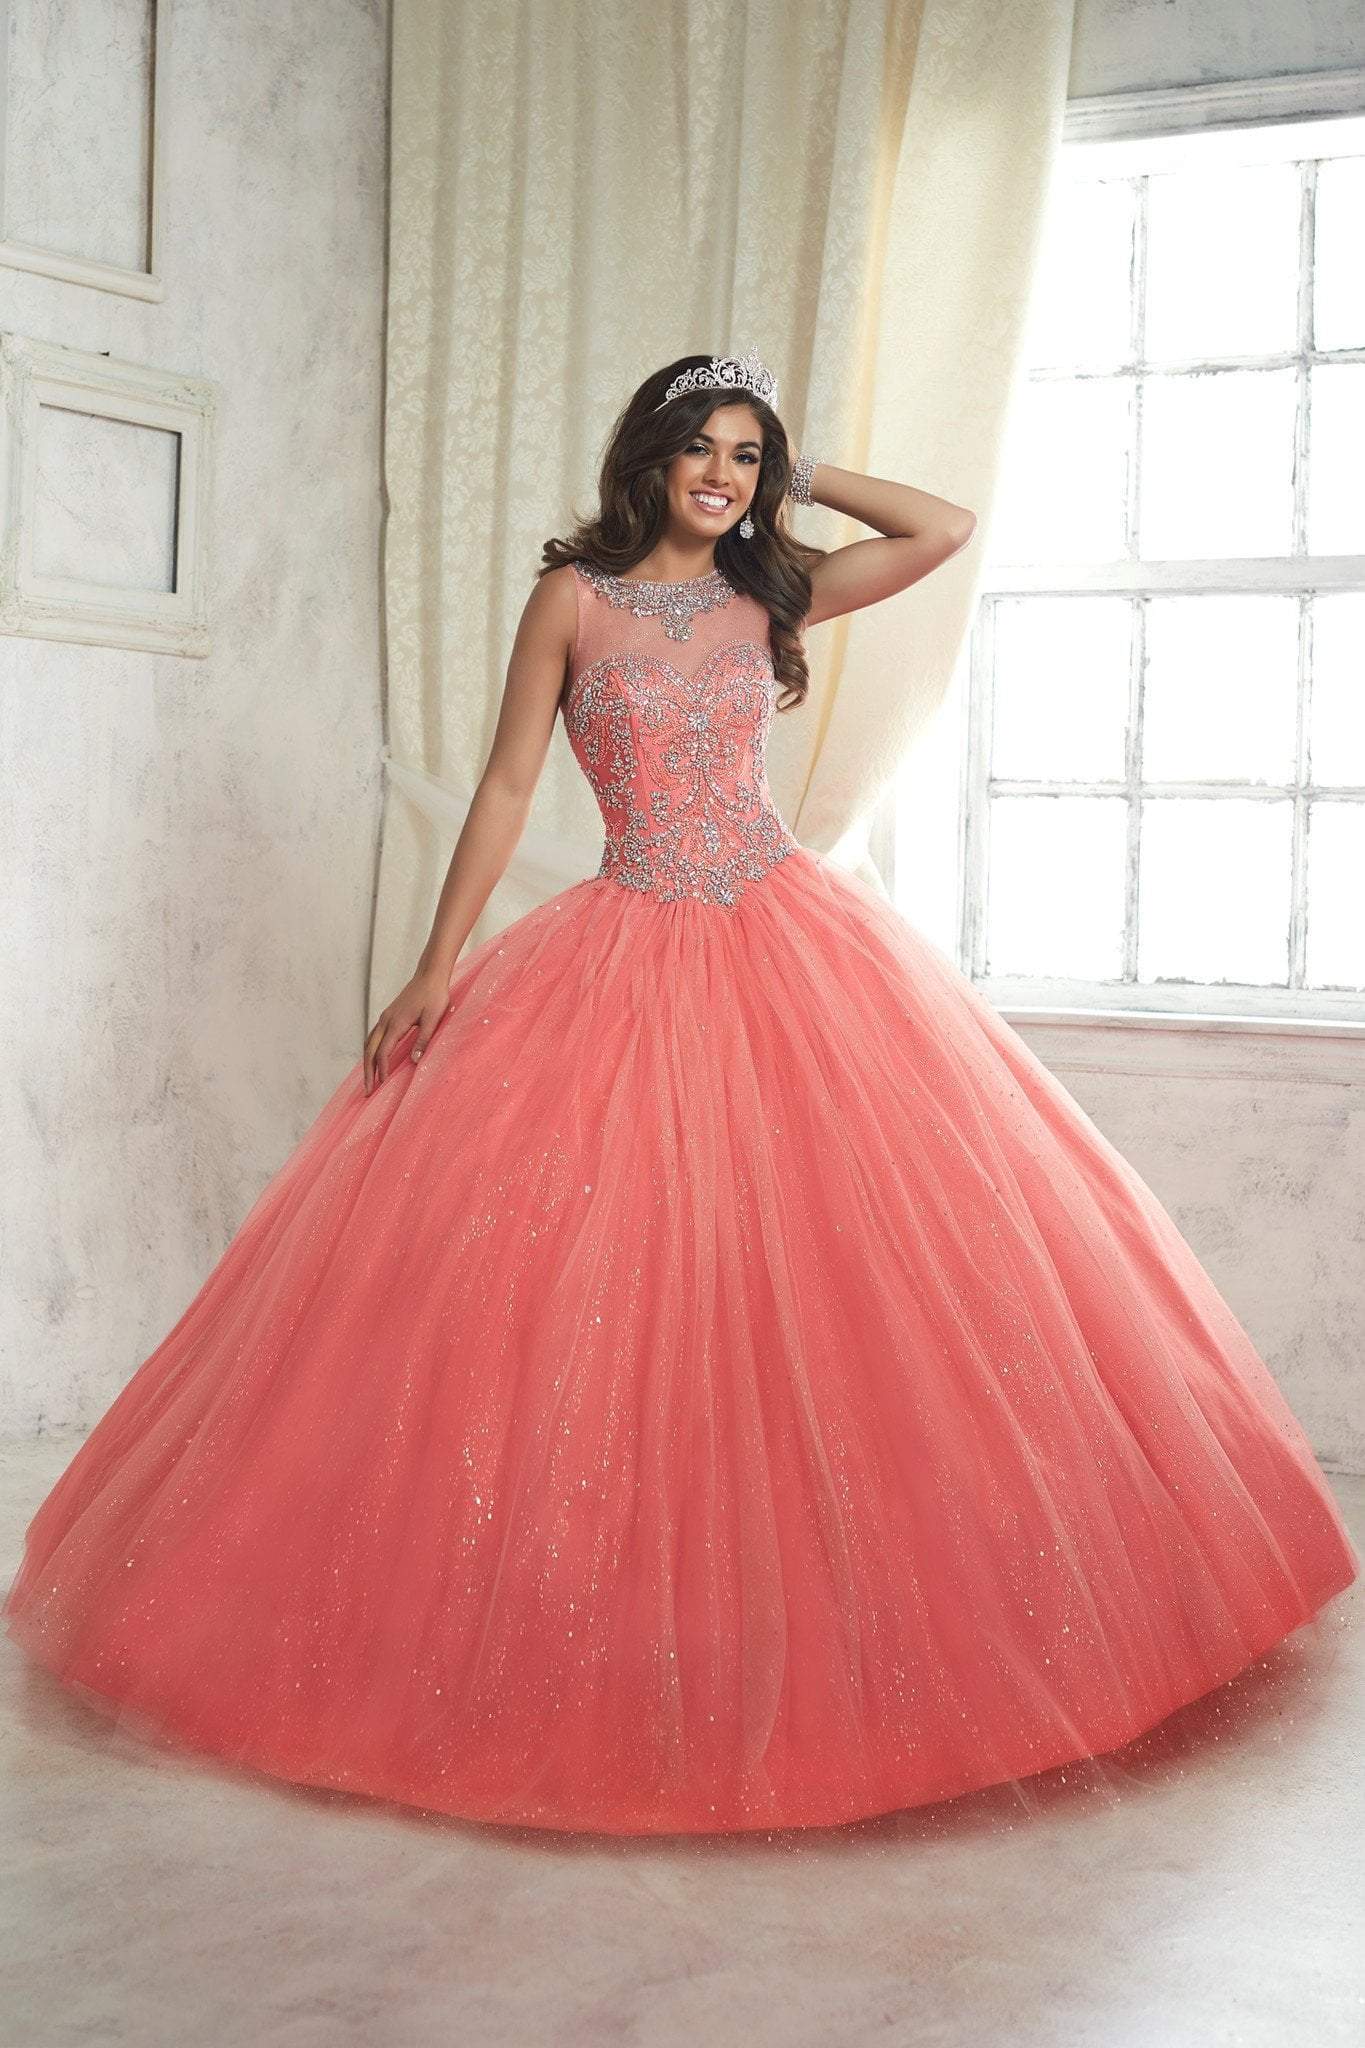 Fiesta Gowns - 56315 Sleeveless Beaded Jewel Tulle Ballgown Special Occasion Dress 0 / Coral/Champagne